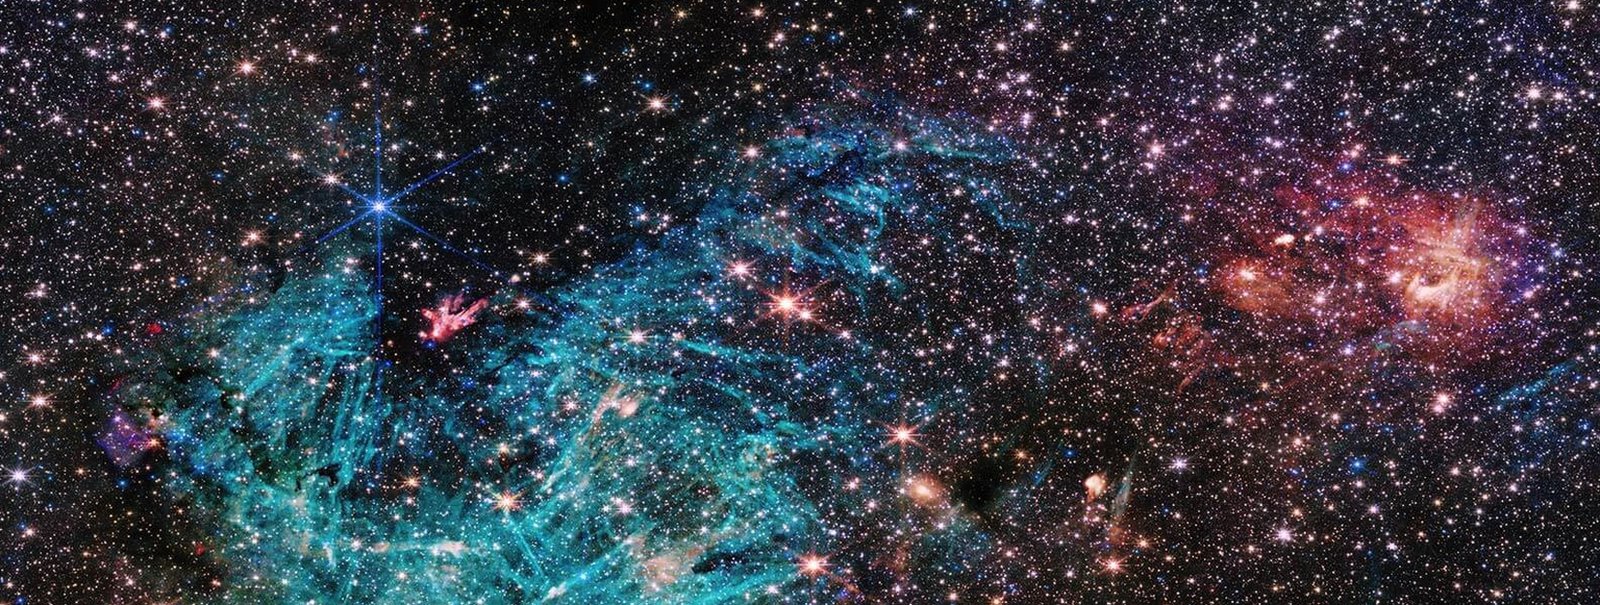 A ingle image shows half a million stars with bright cyan-coloured patches of excited hydrogen gas